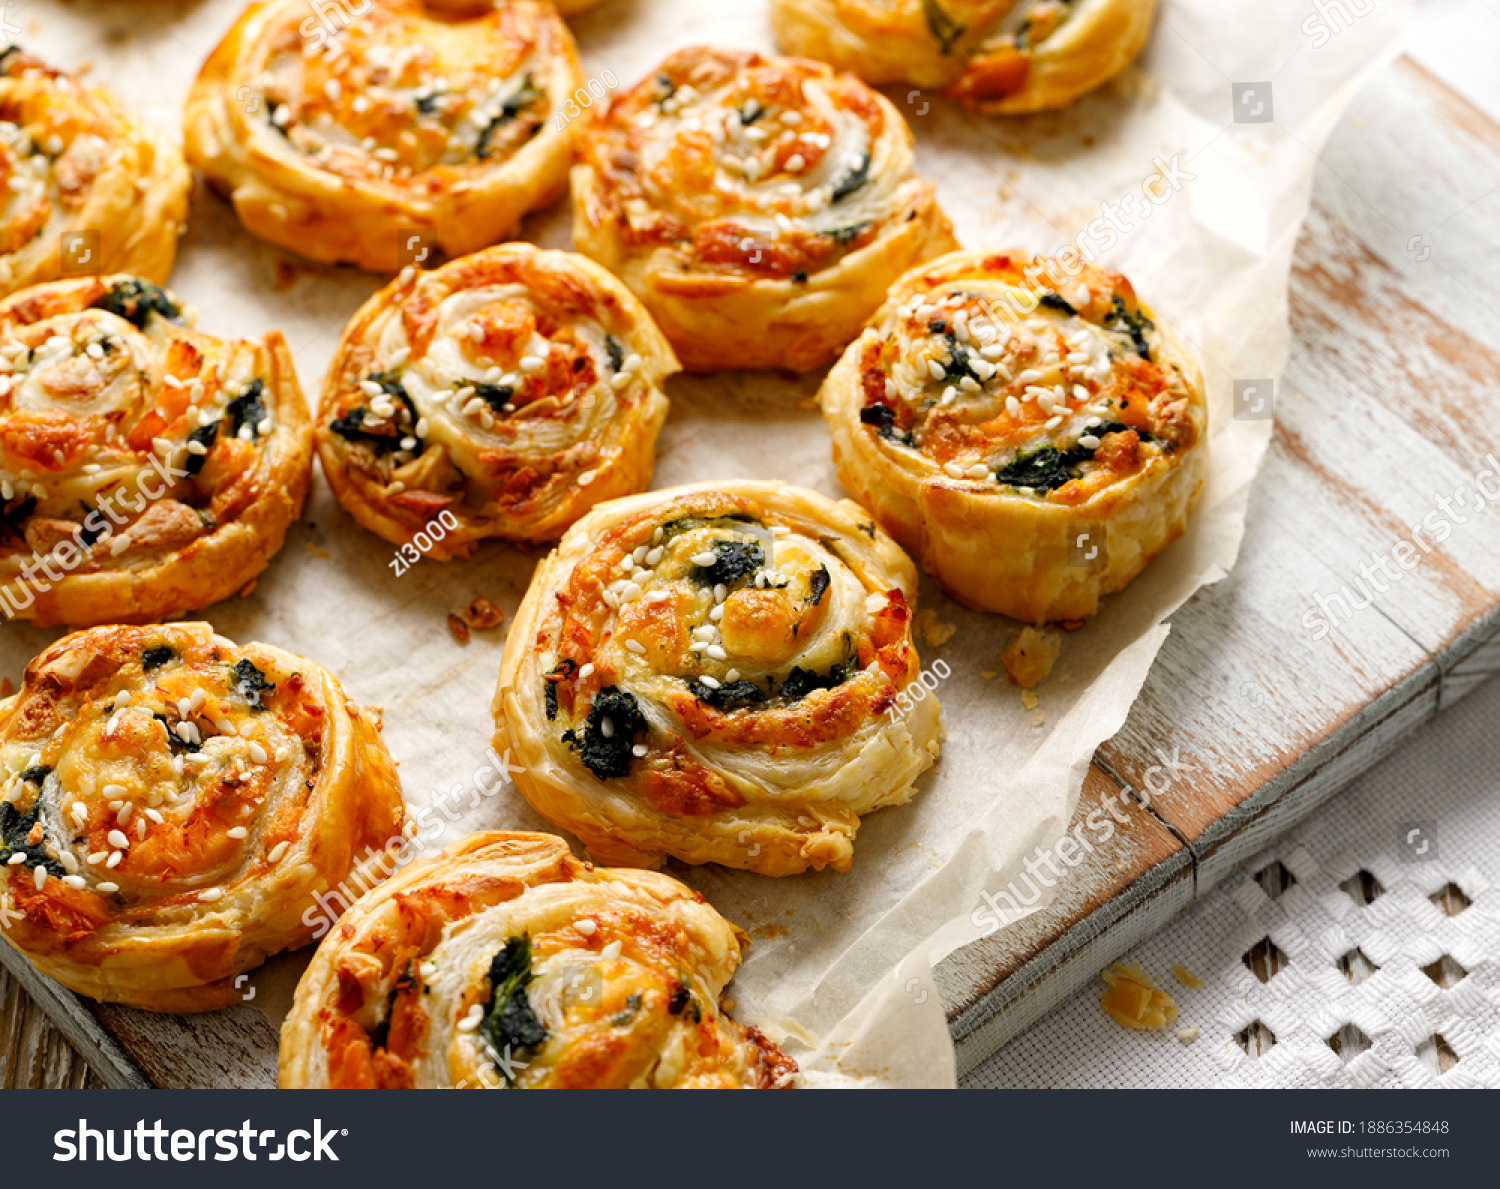 French Puff Pastry Pinwheels stuffed with salmon, cheese and spinach on on baking paper, close up view  #1886354848